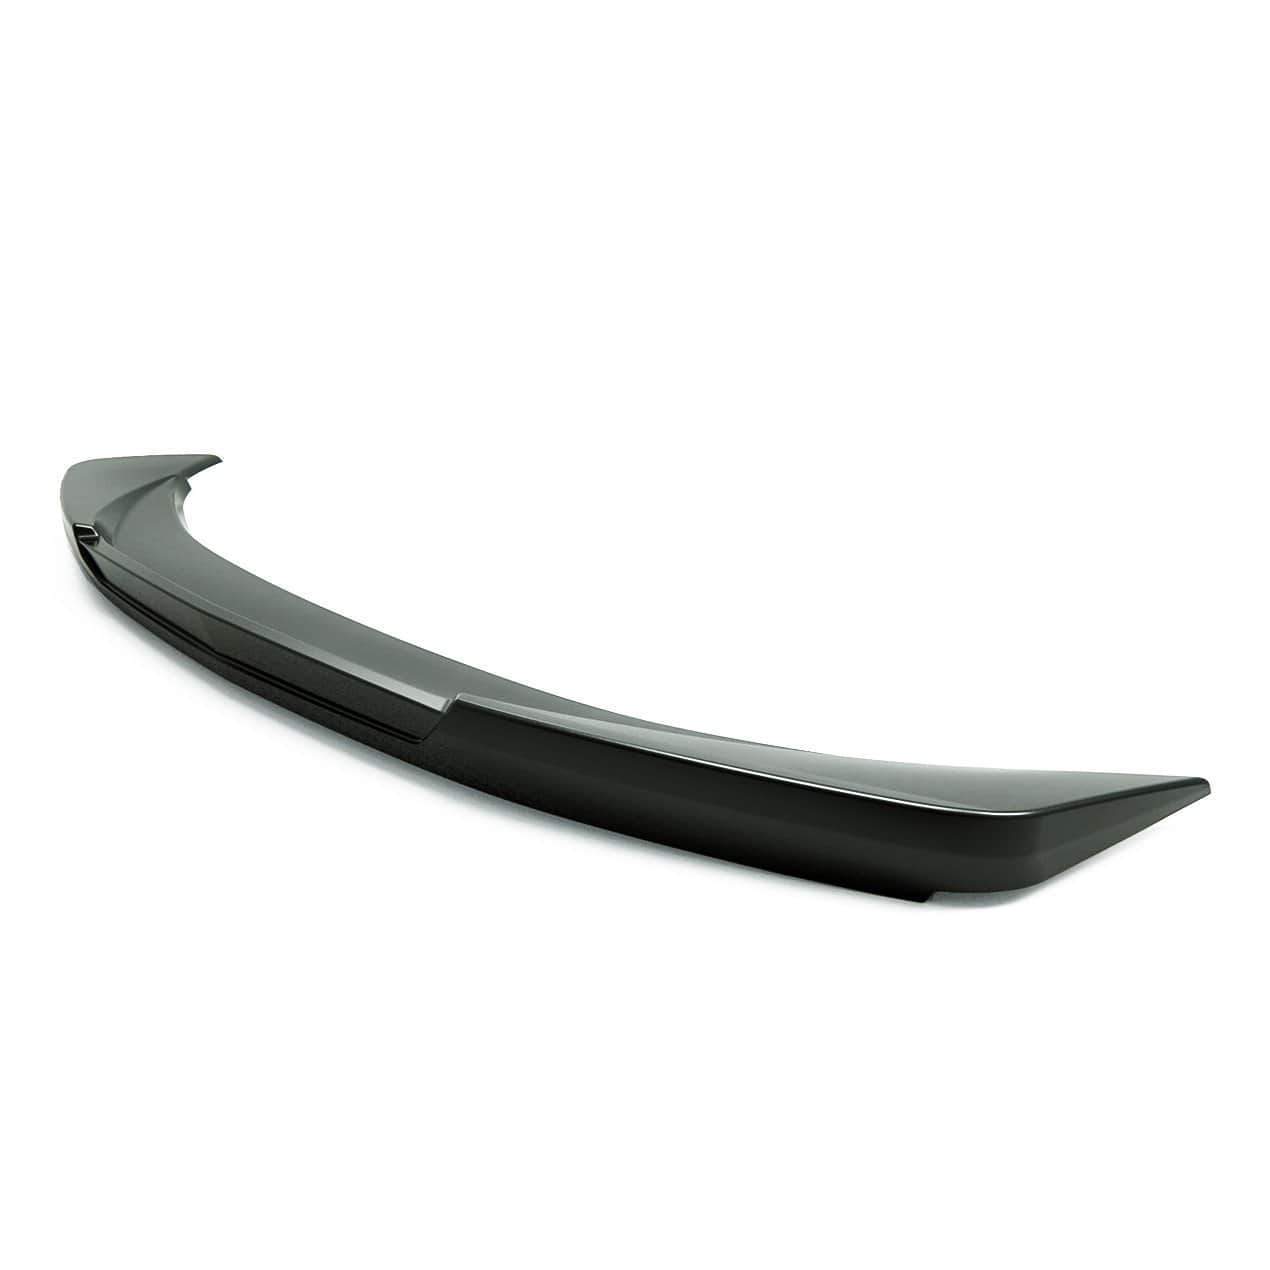 ACS Gen6 Rear Deck Spoiler for Camaro SS & ZL1 [48-4-013]PRM in Gloss Black finish, providing improved downforce and easy bolt-on installation.